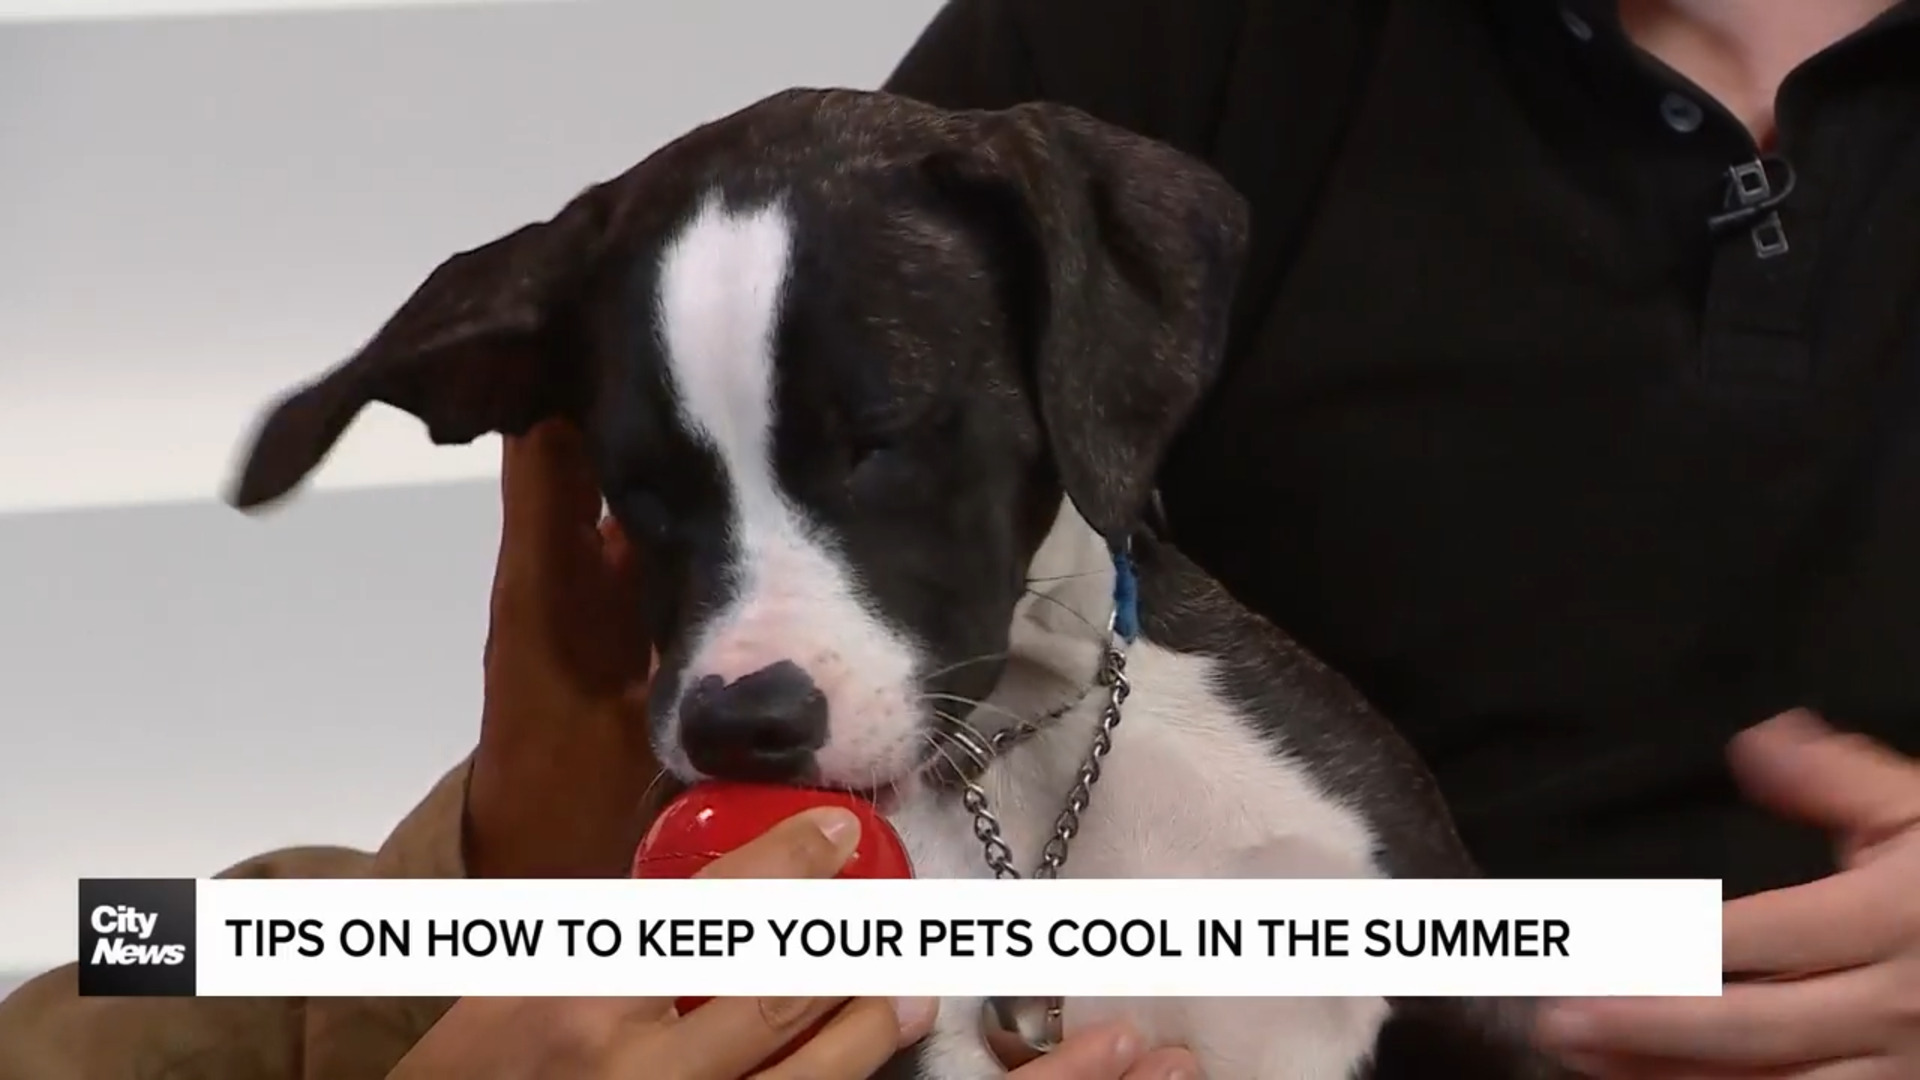 Tips on how to keep pets cool during hot weather days